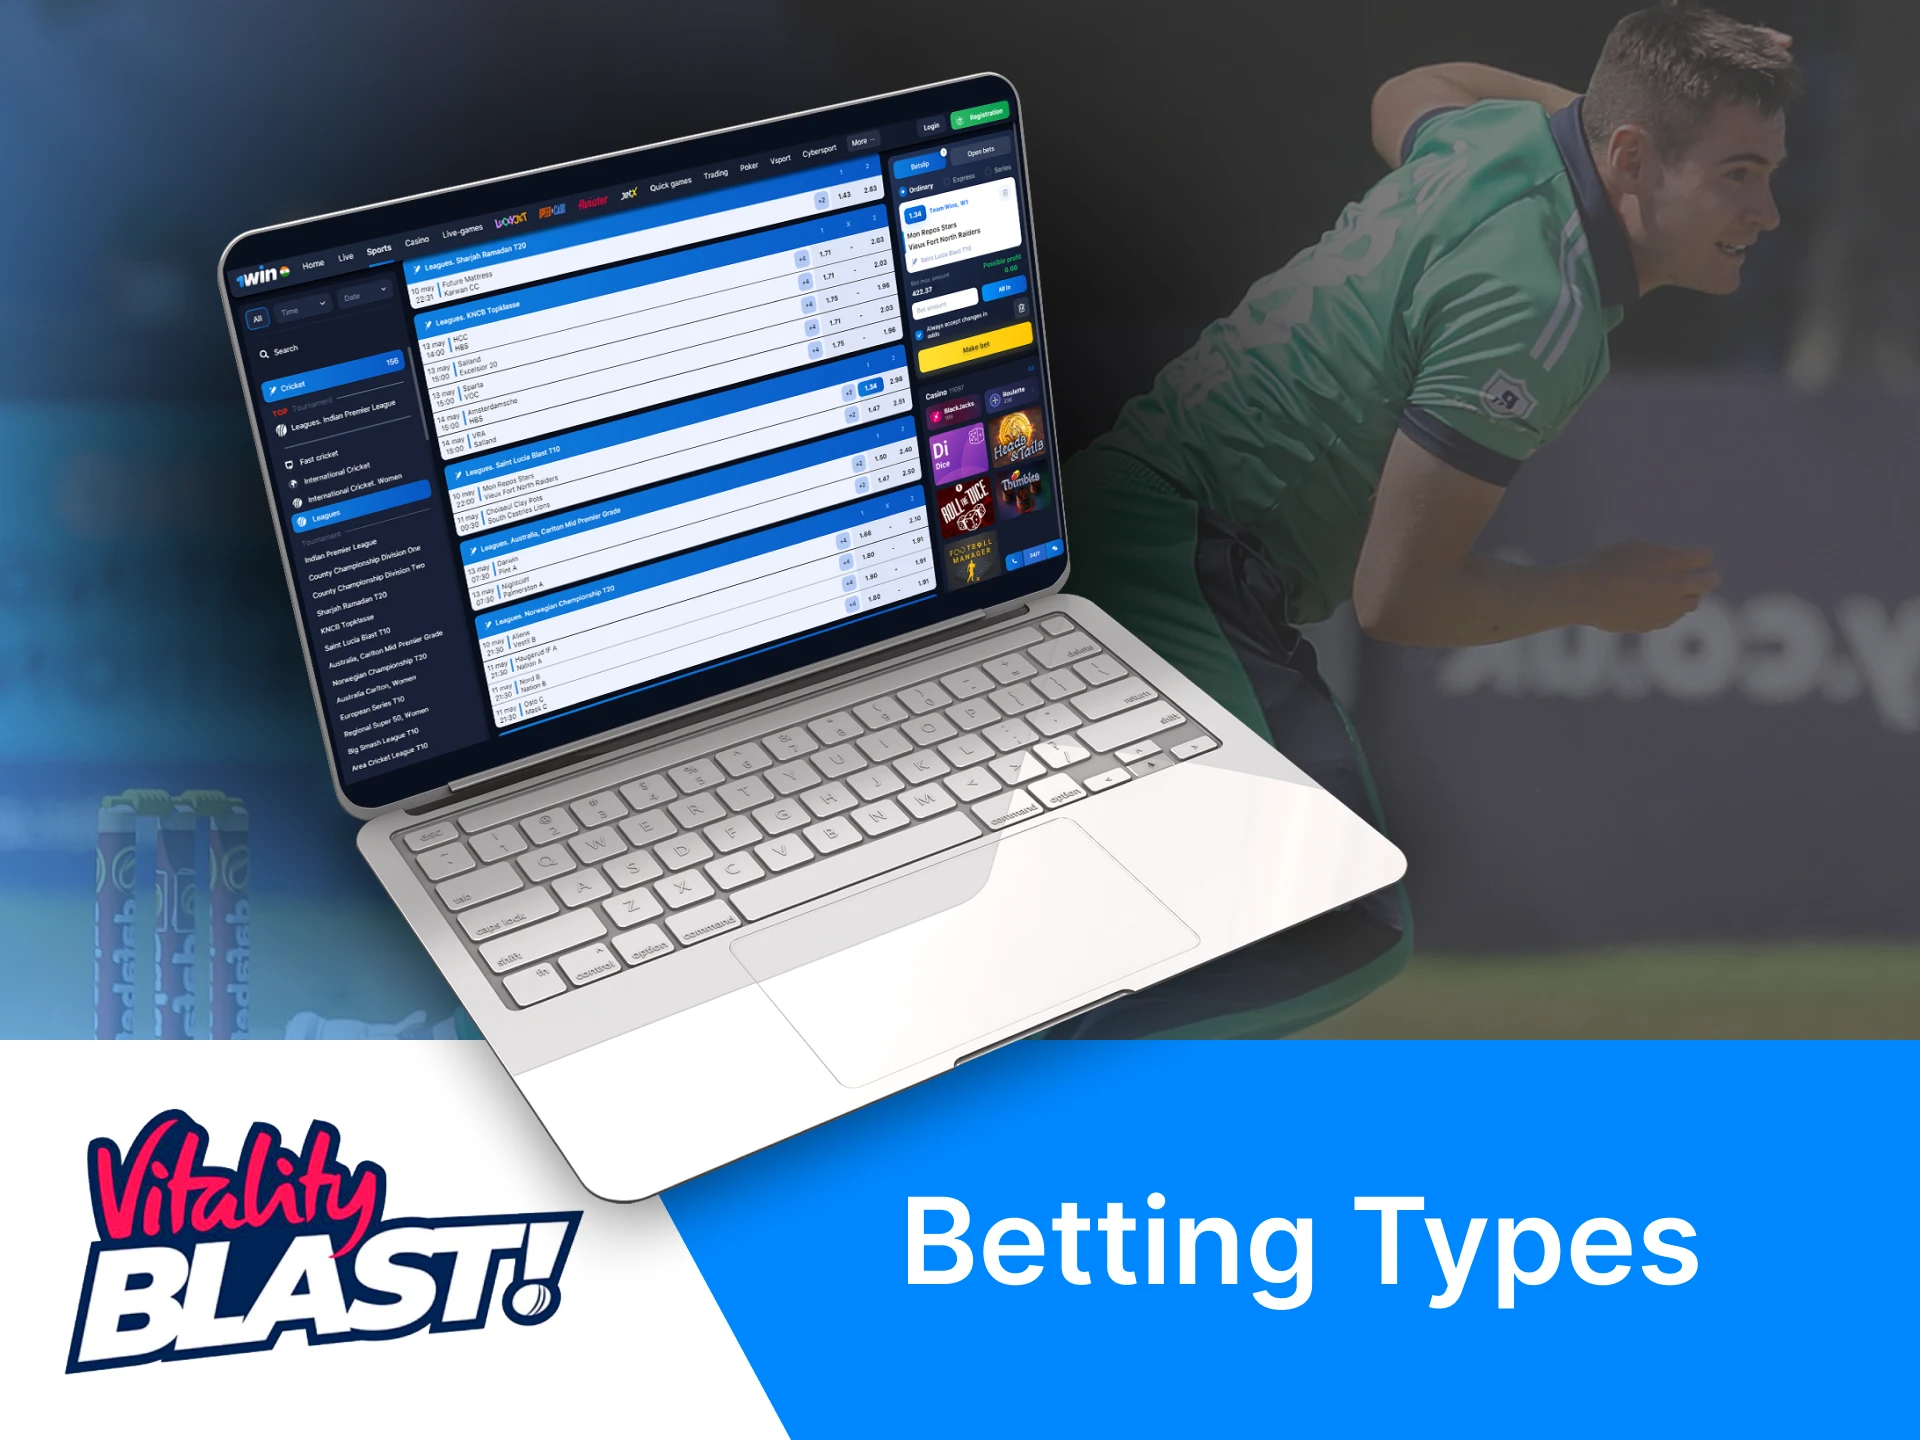 On betting sites, you can place bets on T20 Blast in different categories.